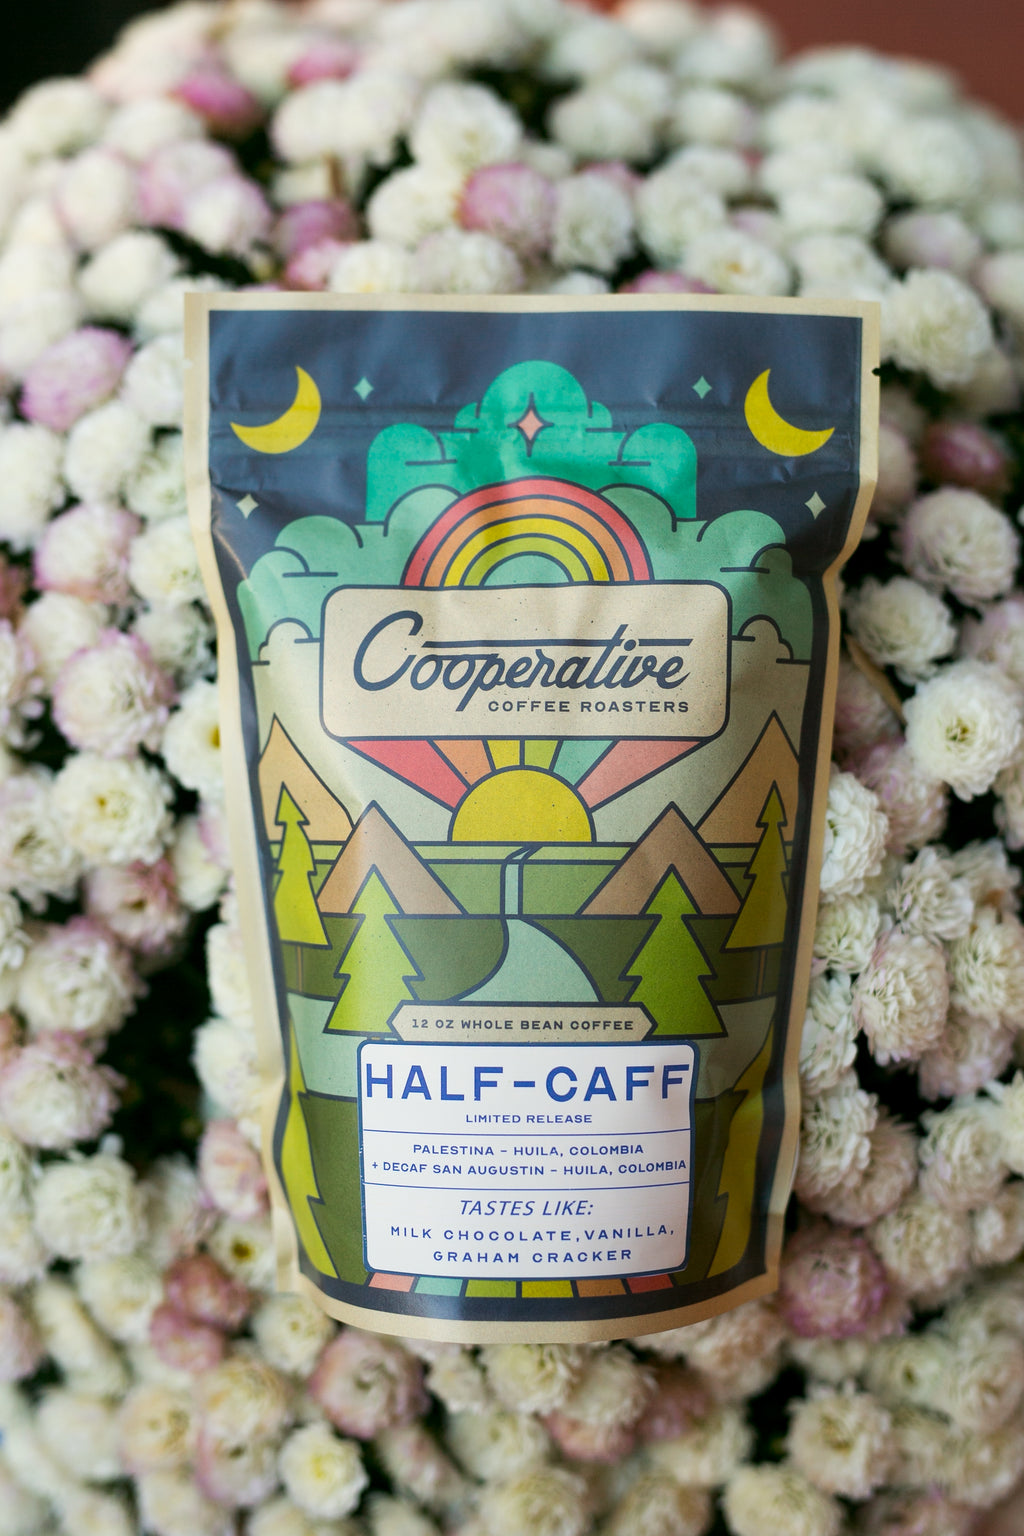 Half-Caff Colombia - Limited Release